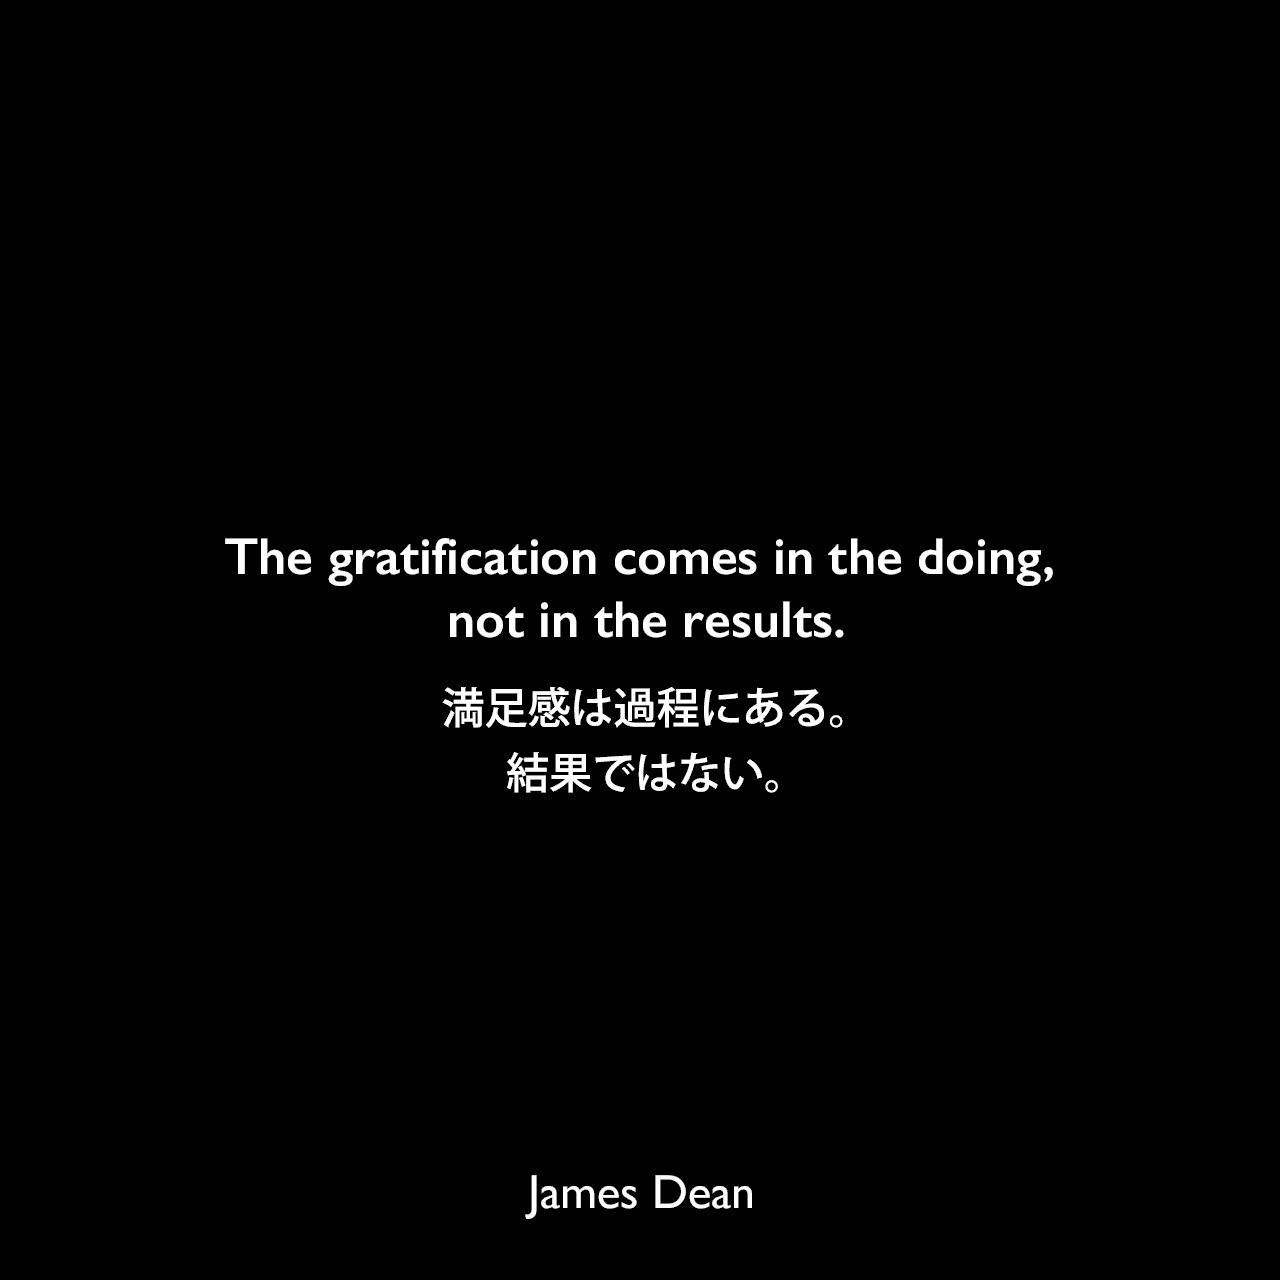 The gratification comes in the doing, not in the results.満足感は過程にある。結果ではない。James Dean